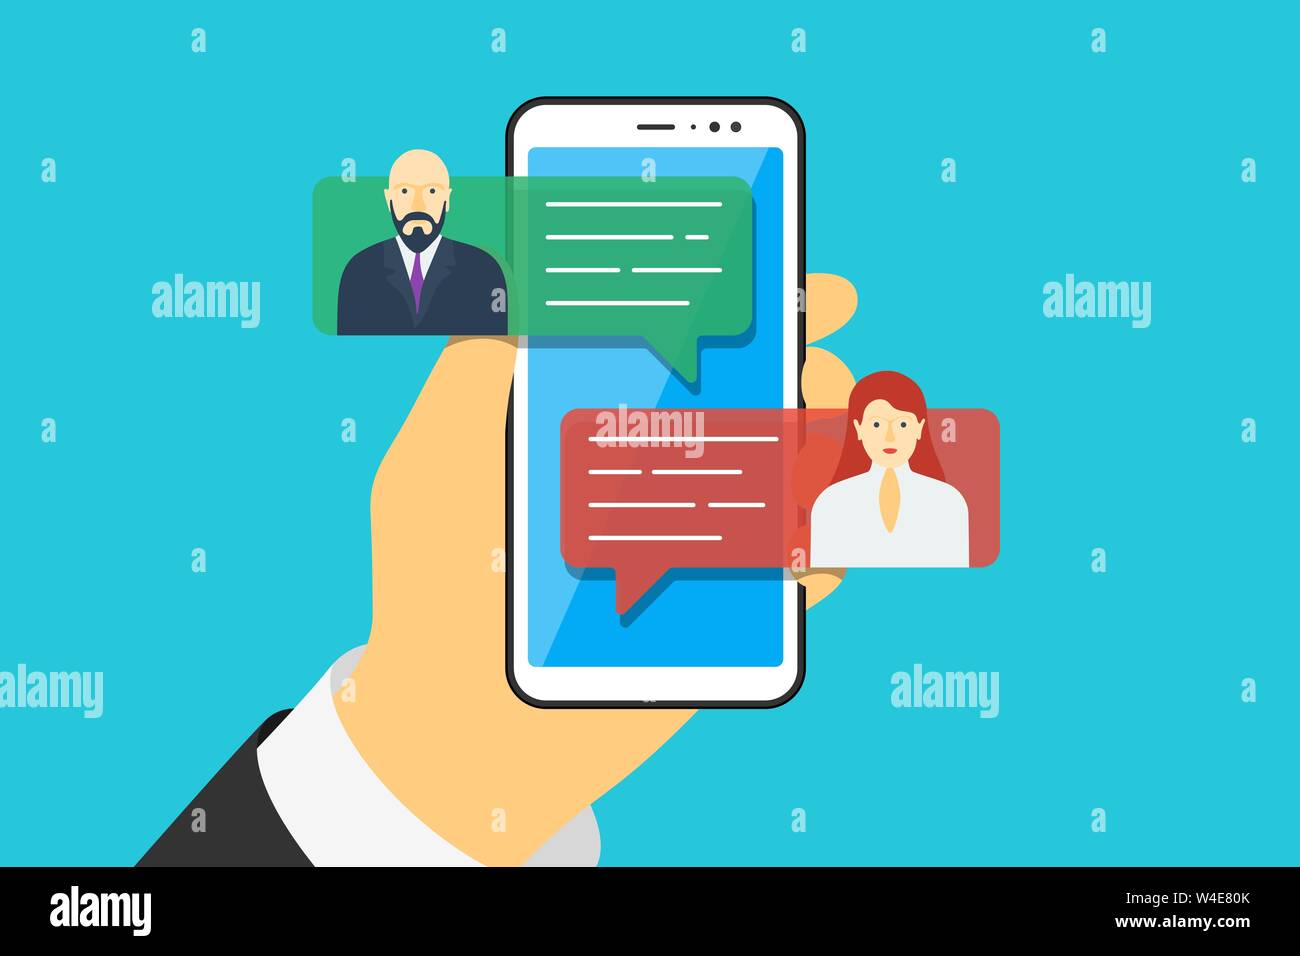 Mobile phone chat message notifications vector illustration on blue background. Hand holding smartphone and chatting bubble speeches. Online talking Stock Vector